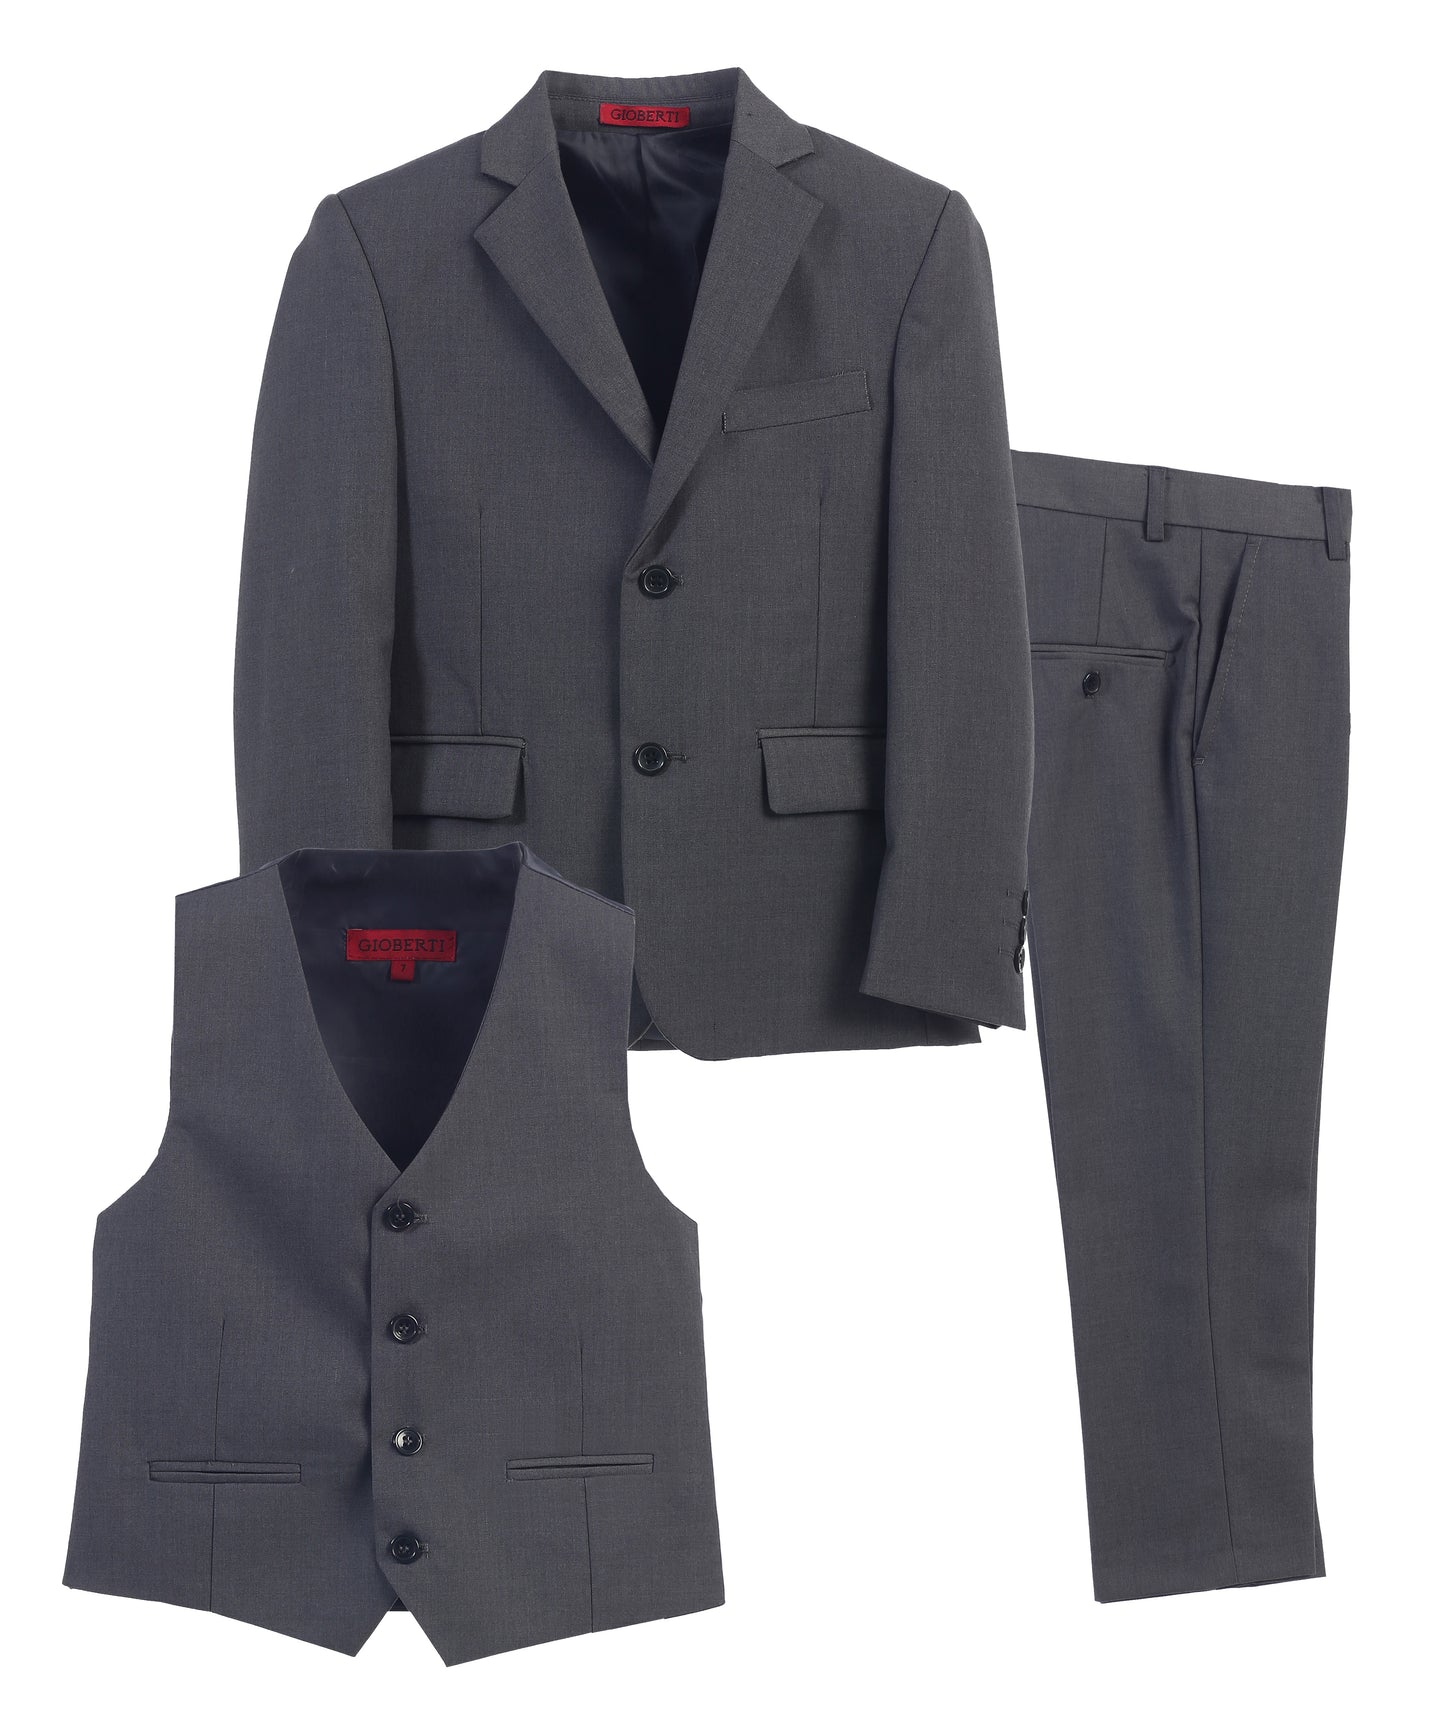 Boys Formal 3 Piece Suit Set with Jacket, Vest and Pants -GB-3BSV